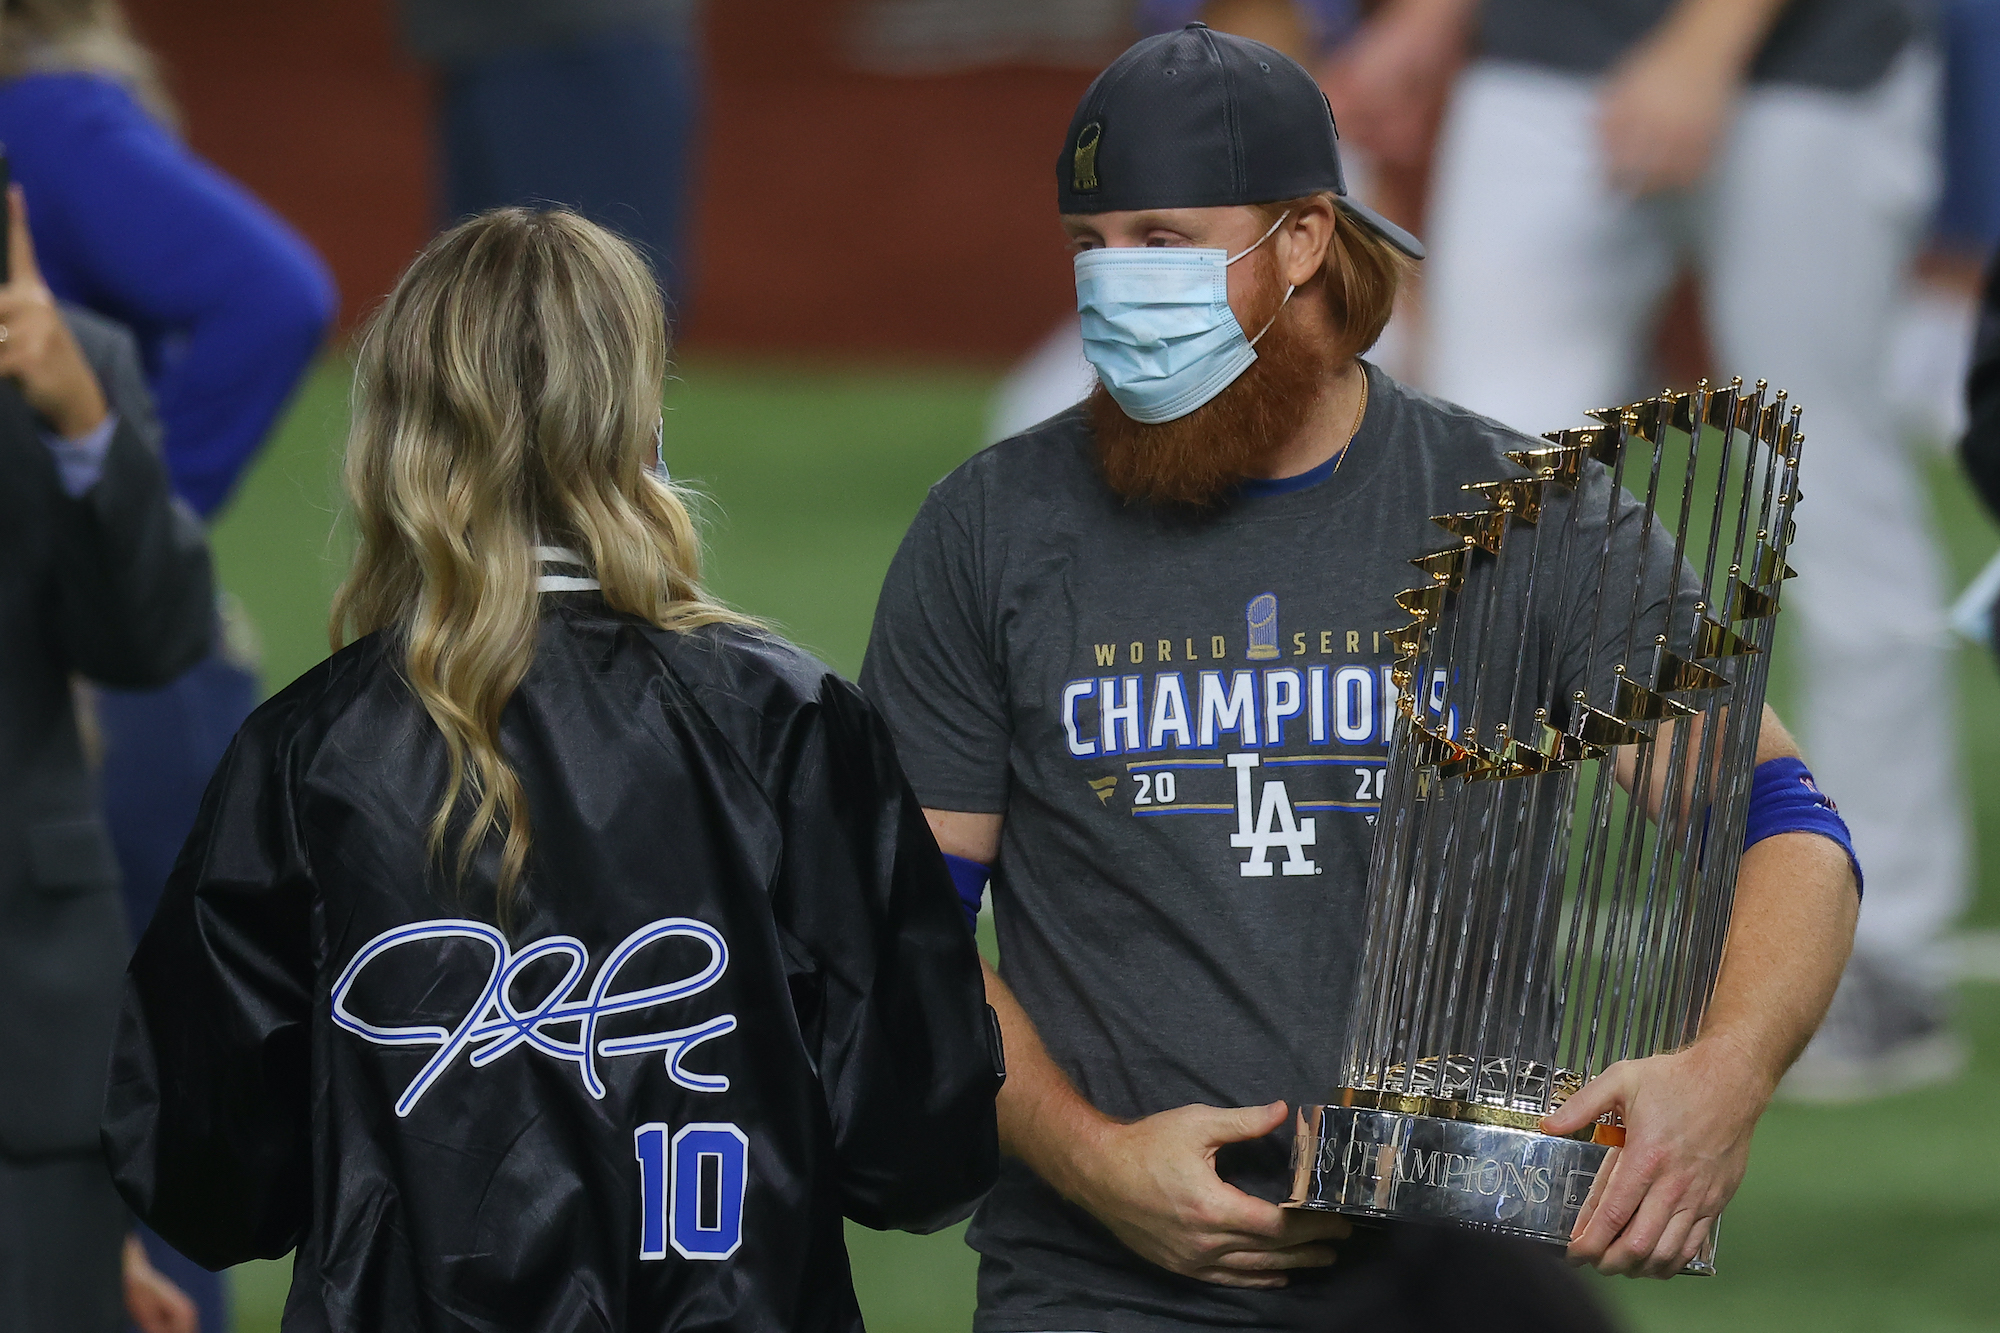 ARLINGTON, TEXAS - OCTOBER 27: Justin Turner #10 of the Los Angeles Dodgers and his wife Kourtney Pogue, hold the Commissioners Trophy after the teams 3-1 victory against the Tampa Bay Rays in Game Six to win the 2020 MLB World Series at Globe Life Field on October 27, 2020 in Arlington, Texas. (Photo by Ronald Martinez/Getty Images)